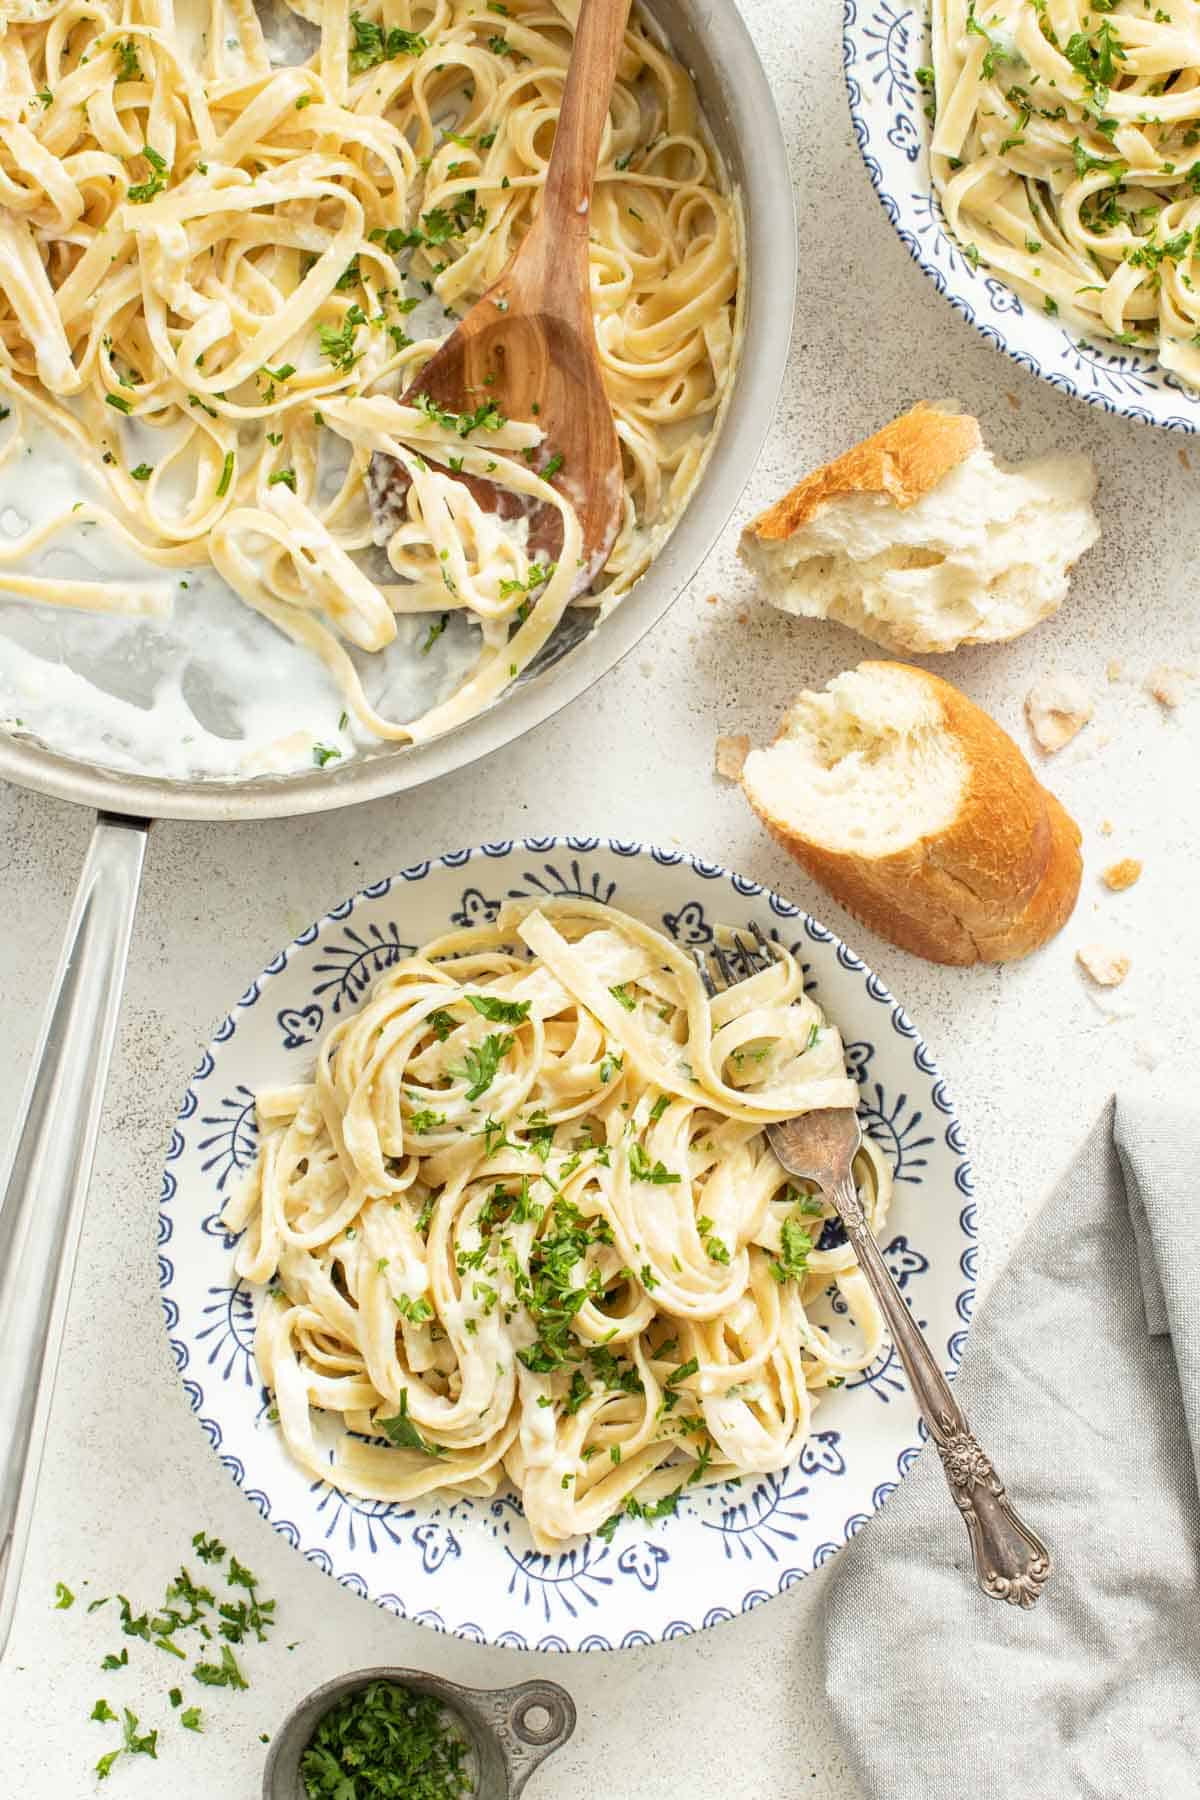 A bowl of fettuccine alfredo next to a baguette and a stainless steel pan of more pasta.